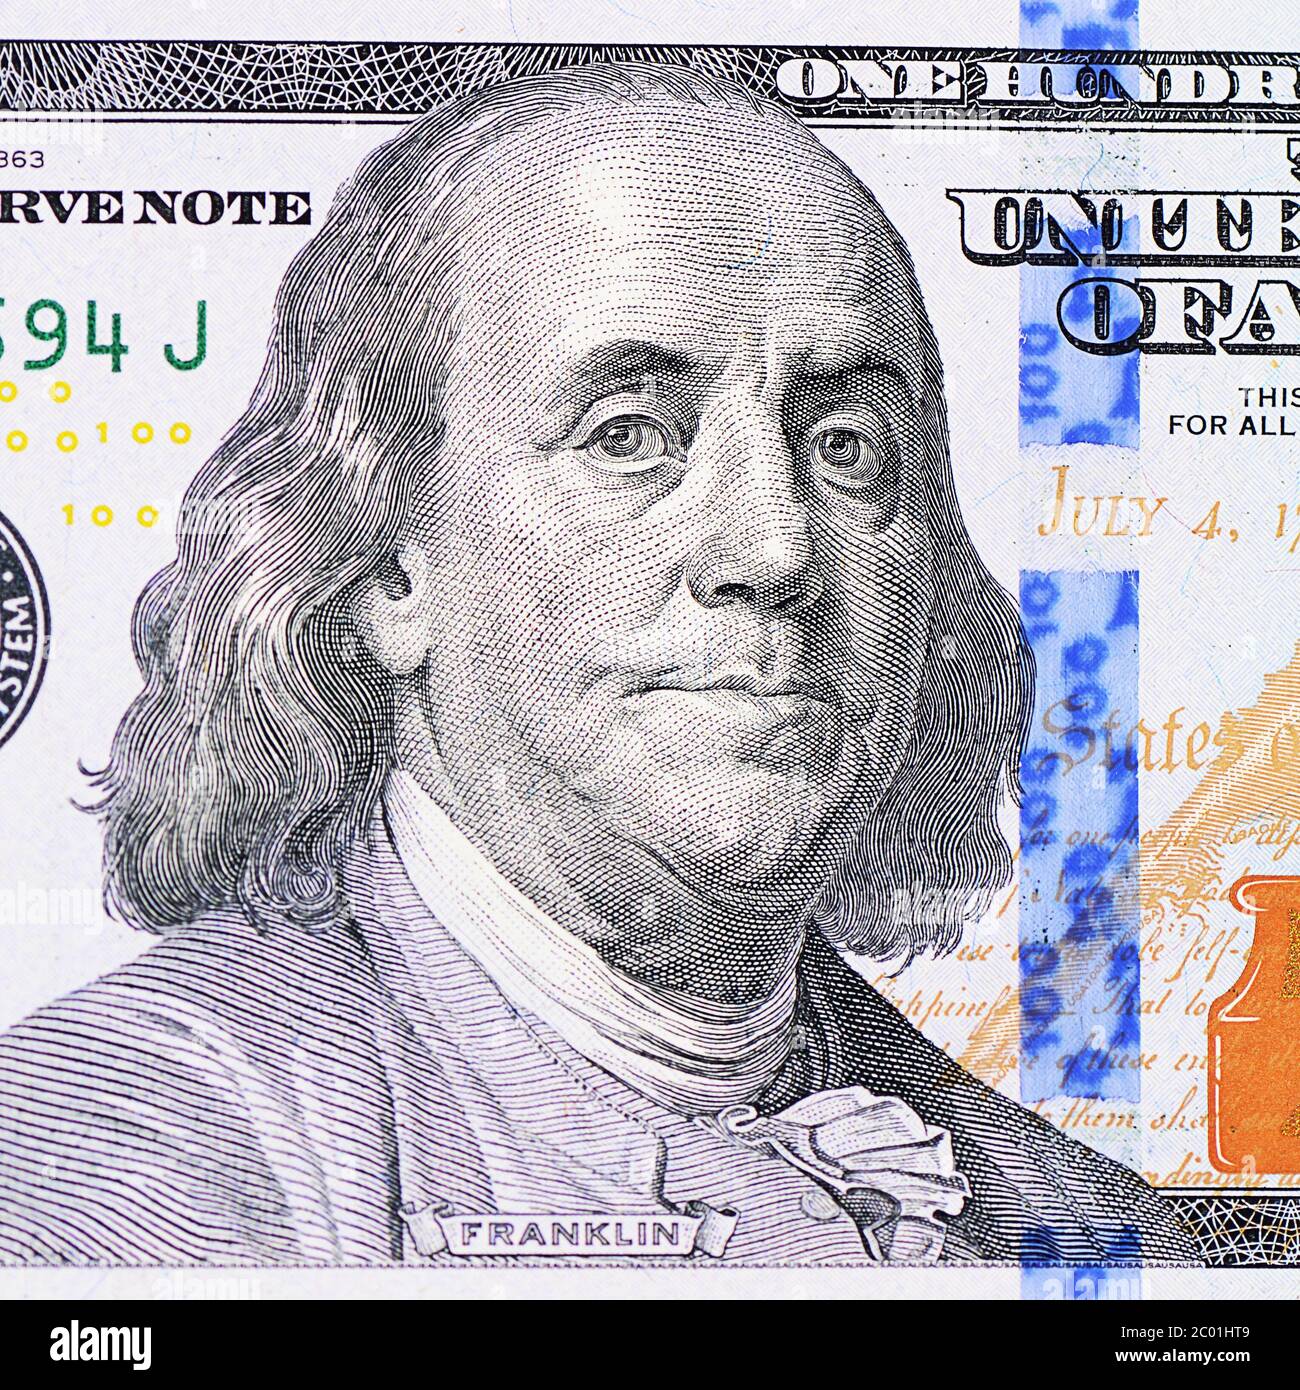 The face Franklin the dollar bill Stock Photo